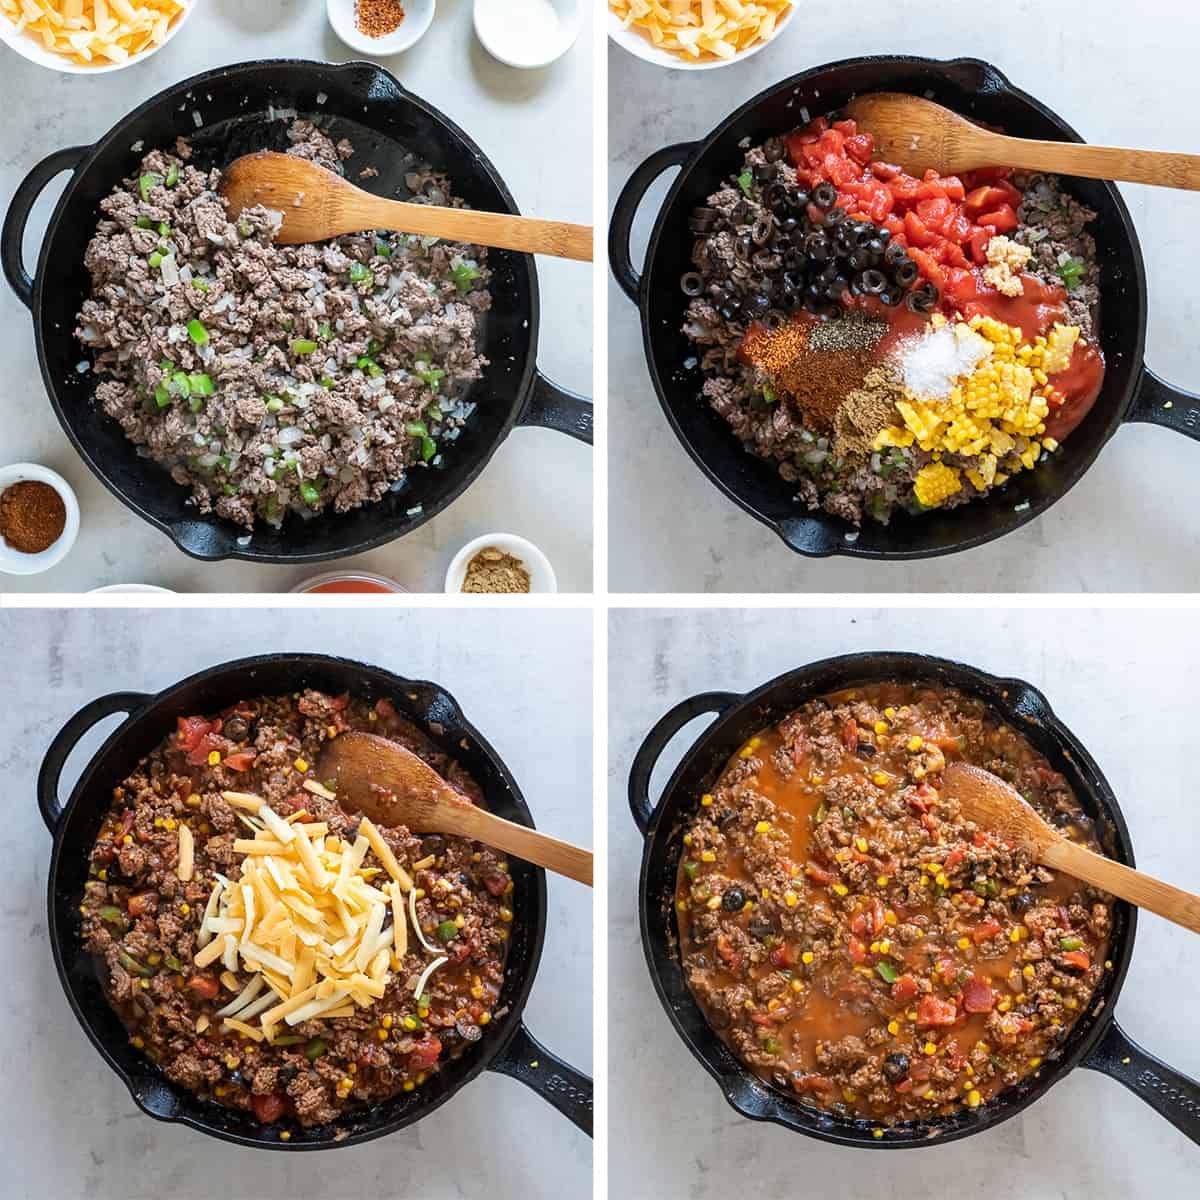 Ground beef and other ingredients cooking in a skillet.